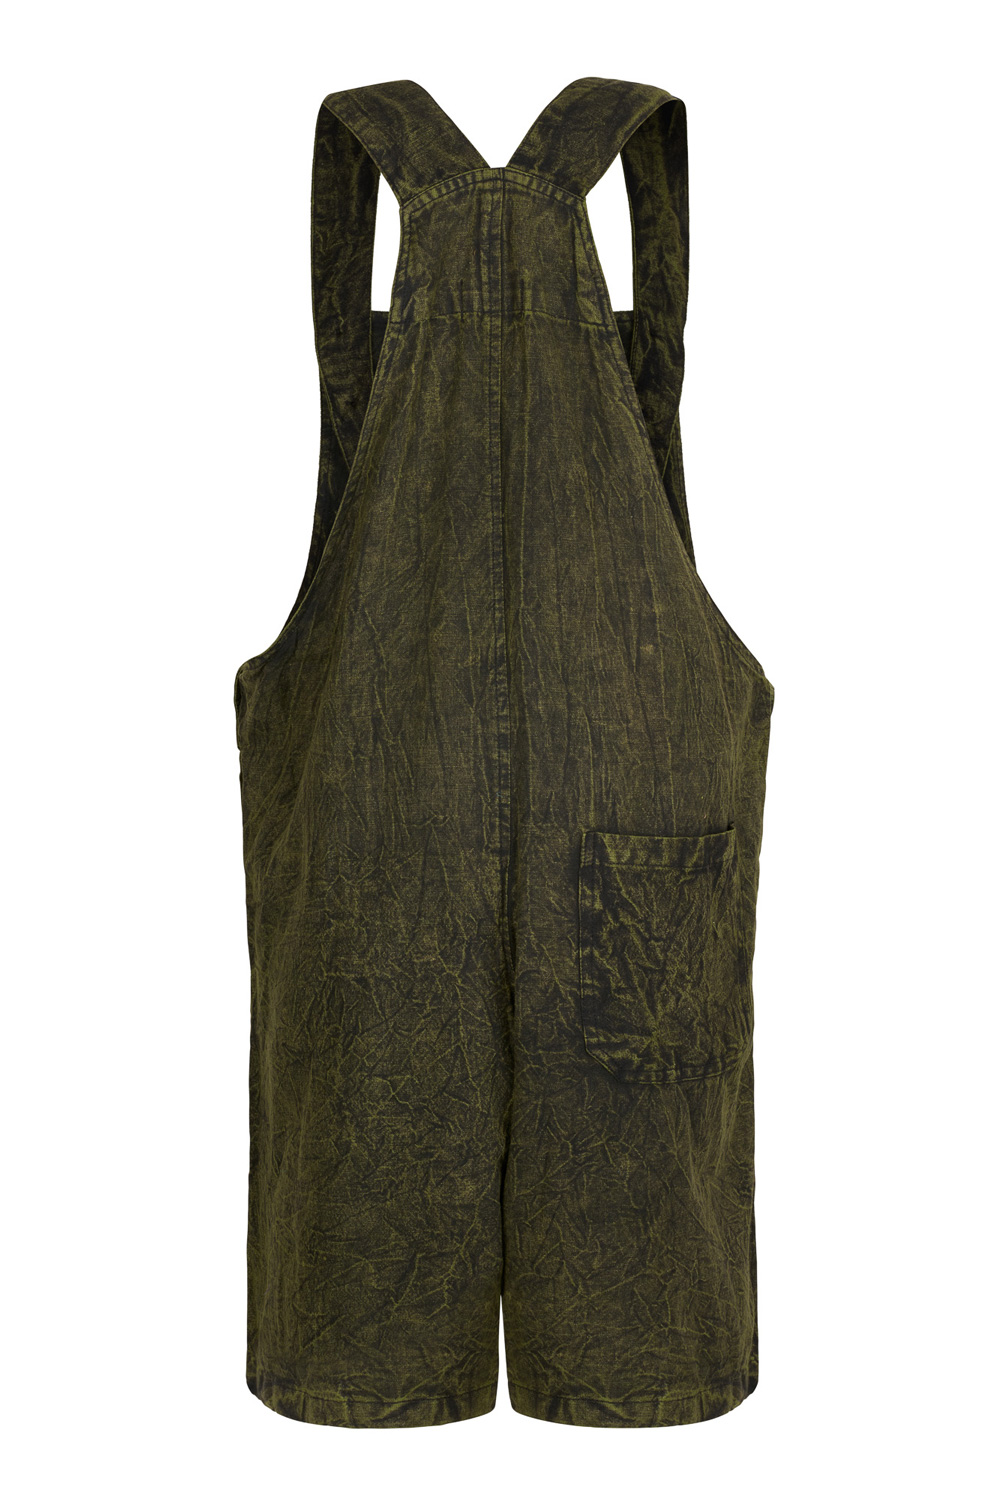 Wicked Dragon Clothing - Hippie Spiral Sun dungaree shorts with pockets